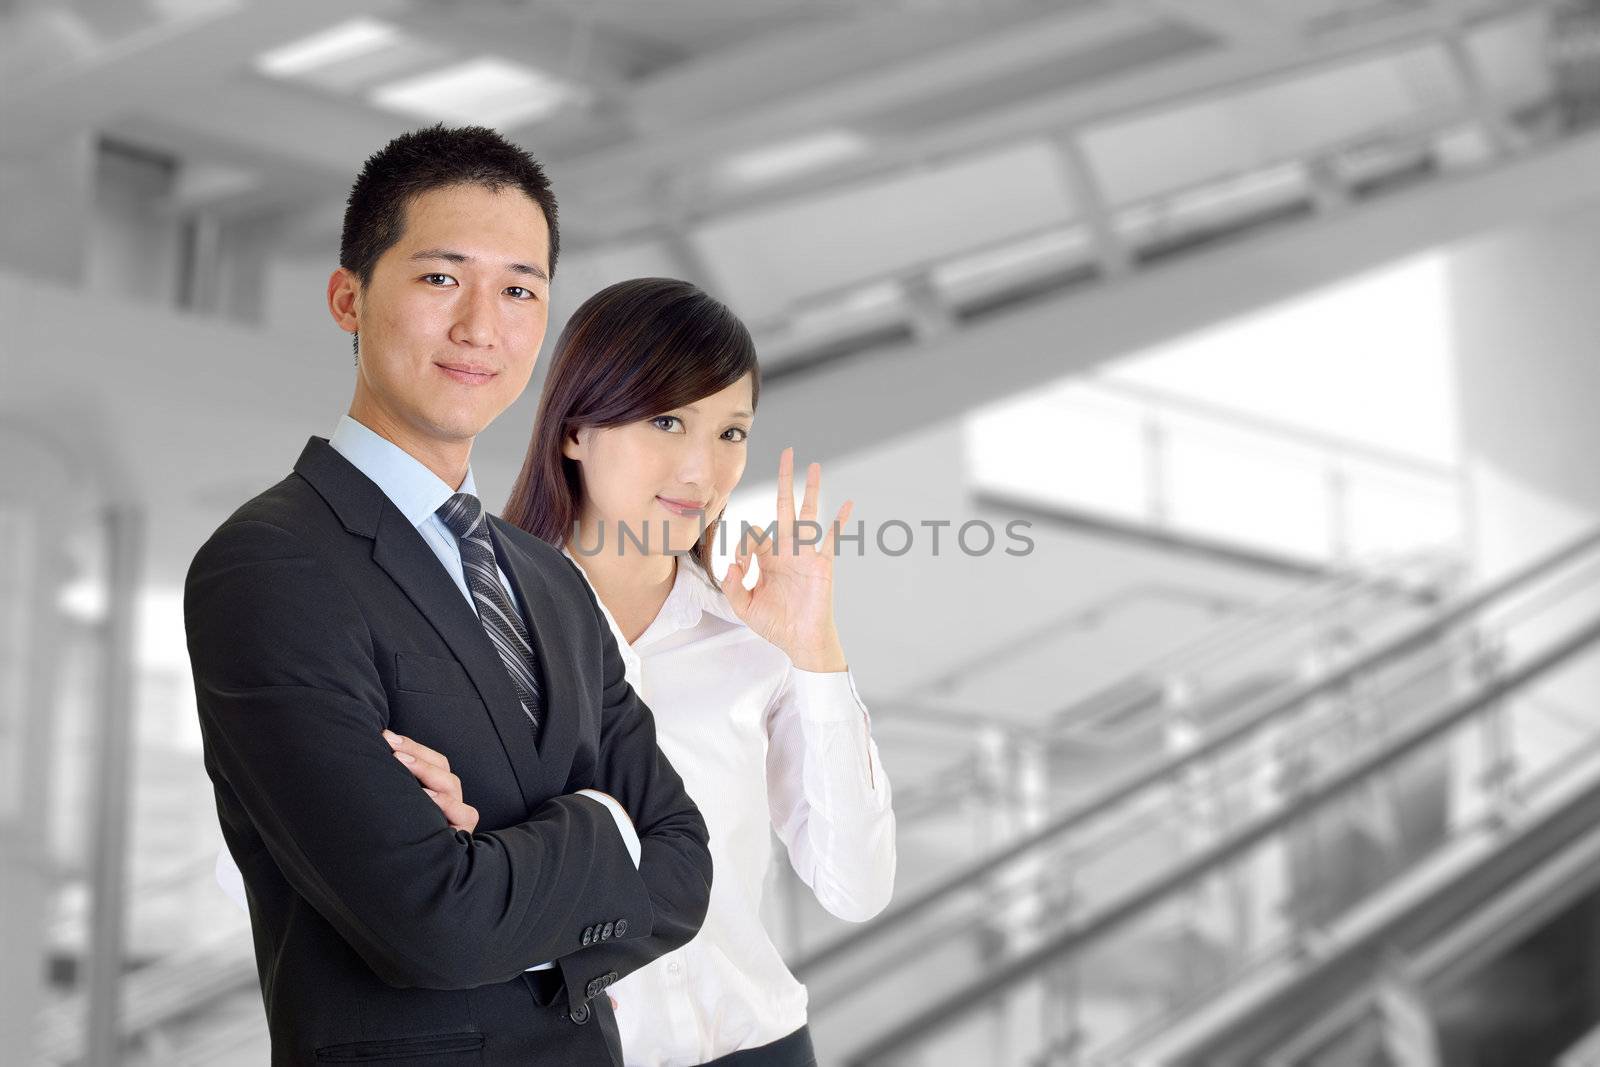 Business team, smiling businessman and friendly businesswoman in modern building.